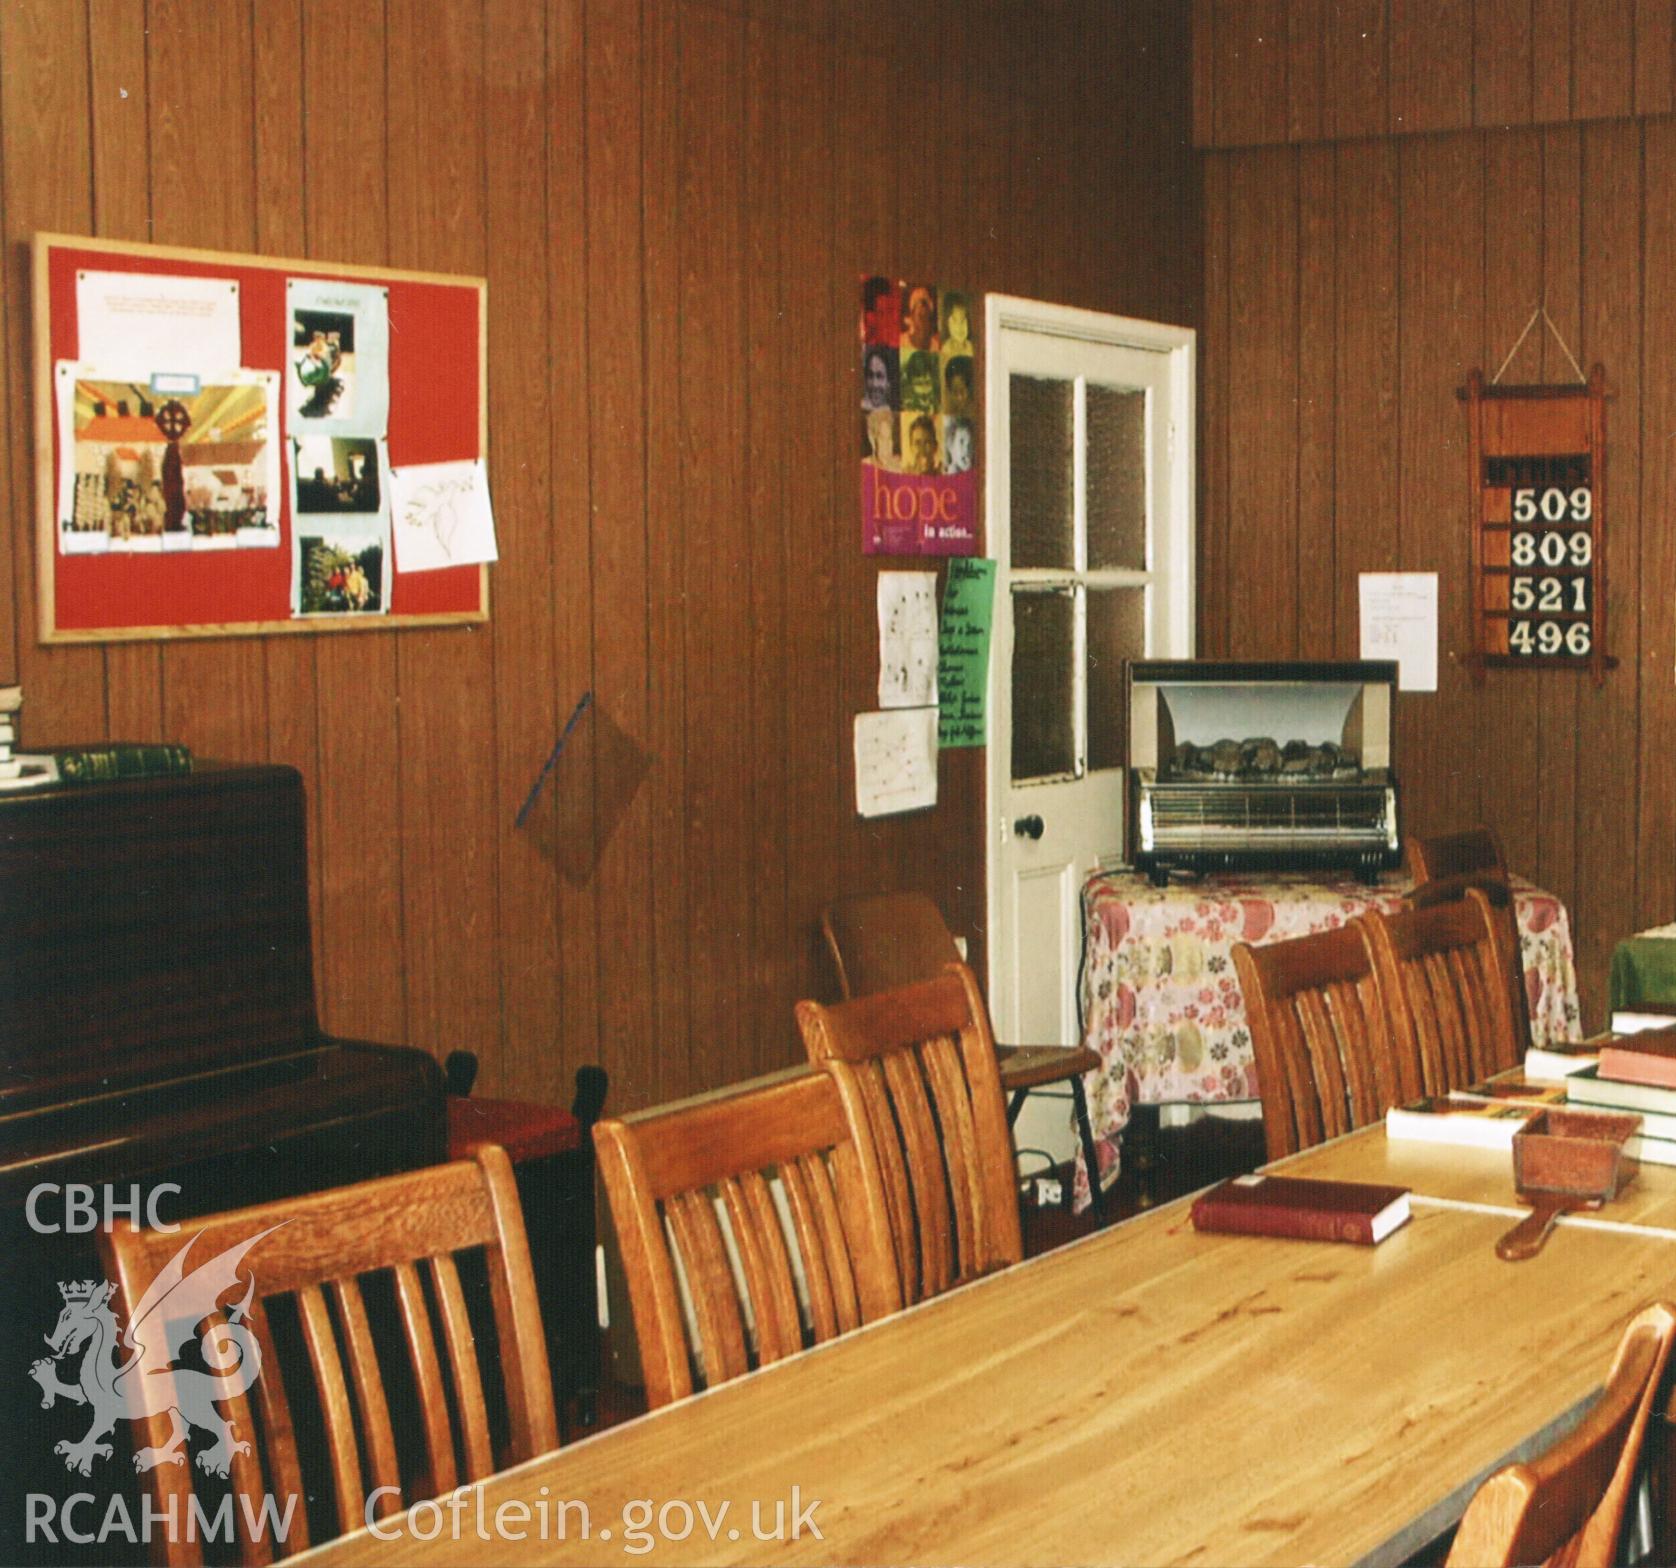 Colour photograph of the 'Babies' Sunday School room, 2005. Donated to the RCAHMW by Cyril Philips as part of the Digital Dissent Project.